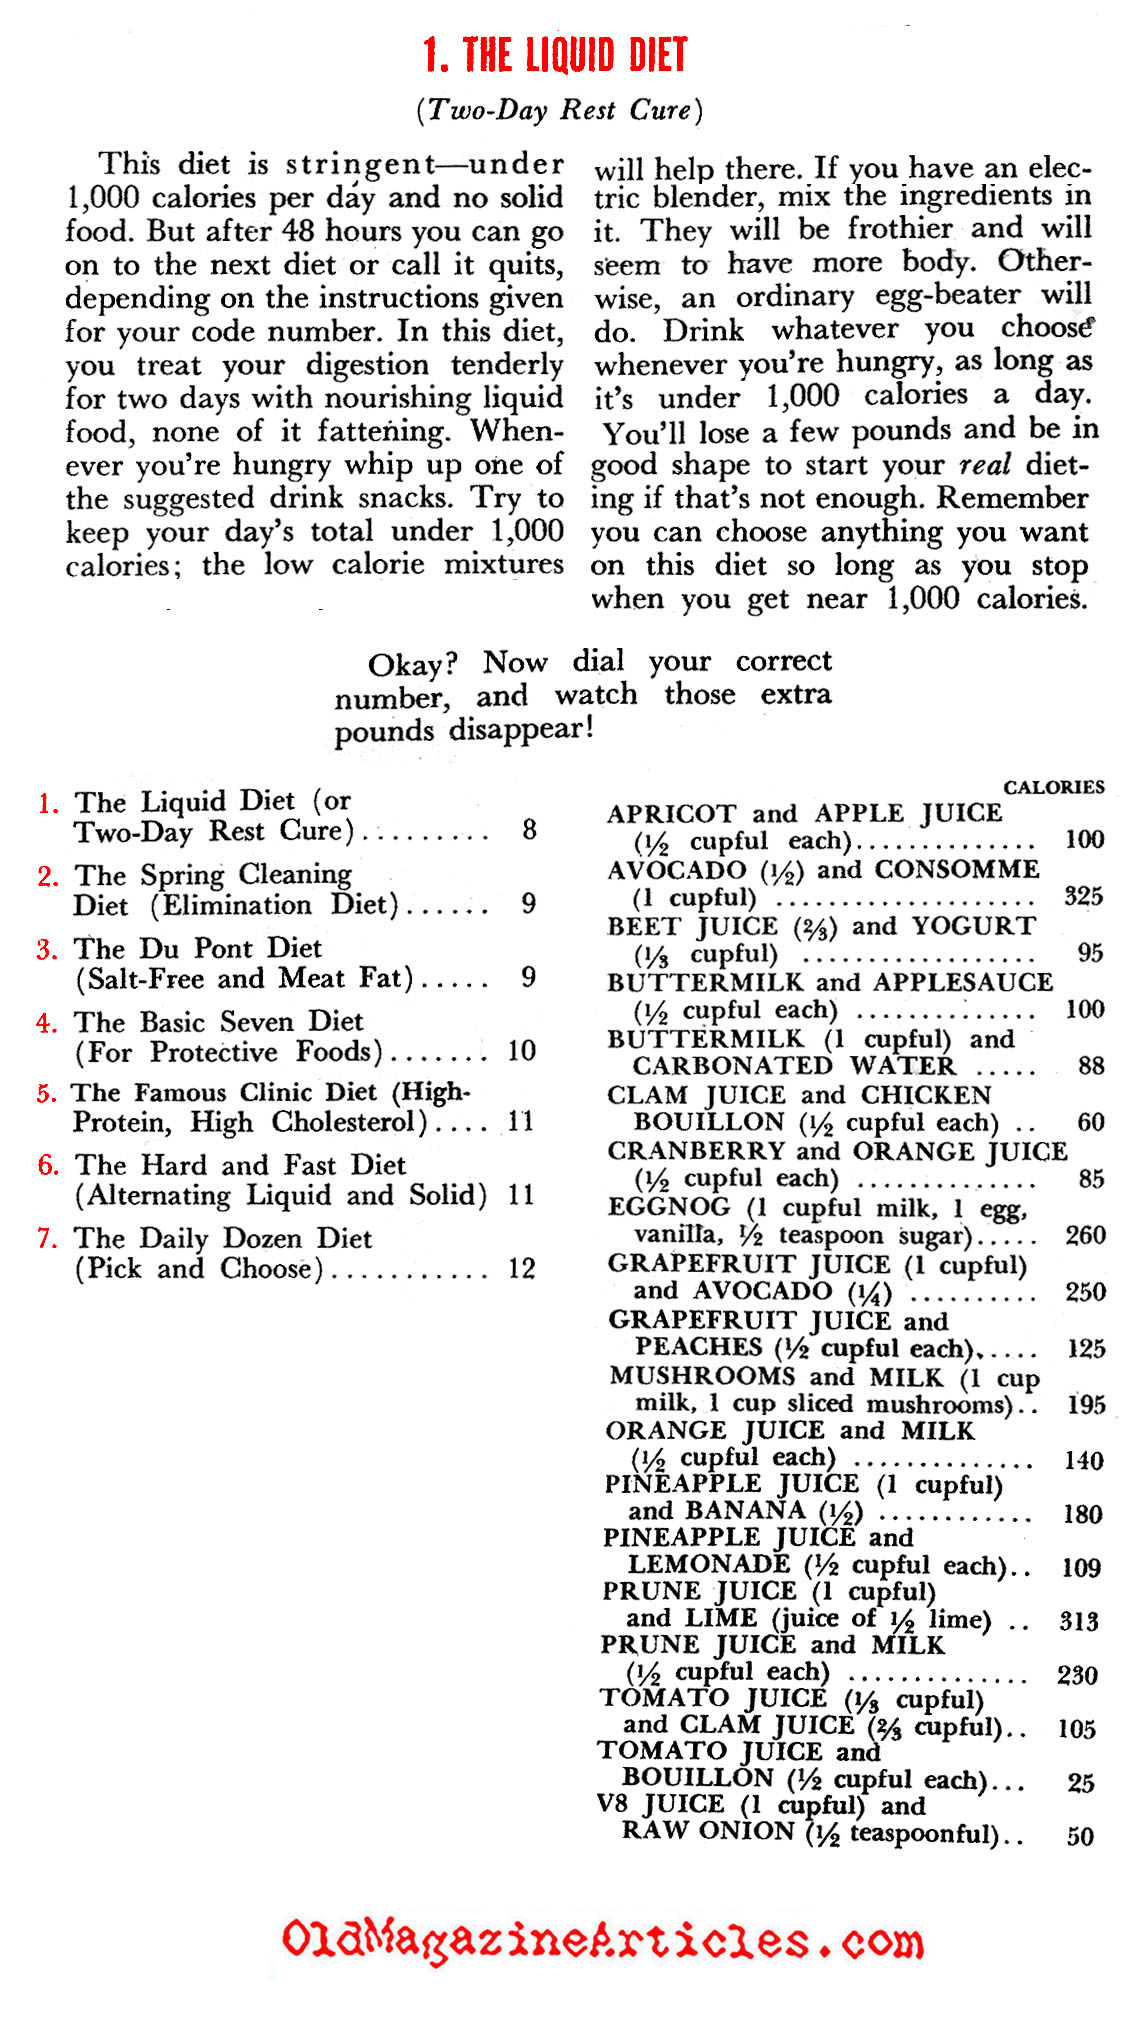 The Dial Diet of 1955